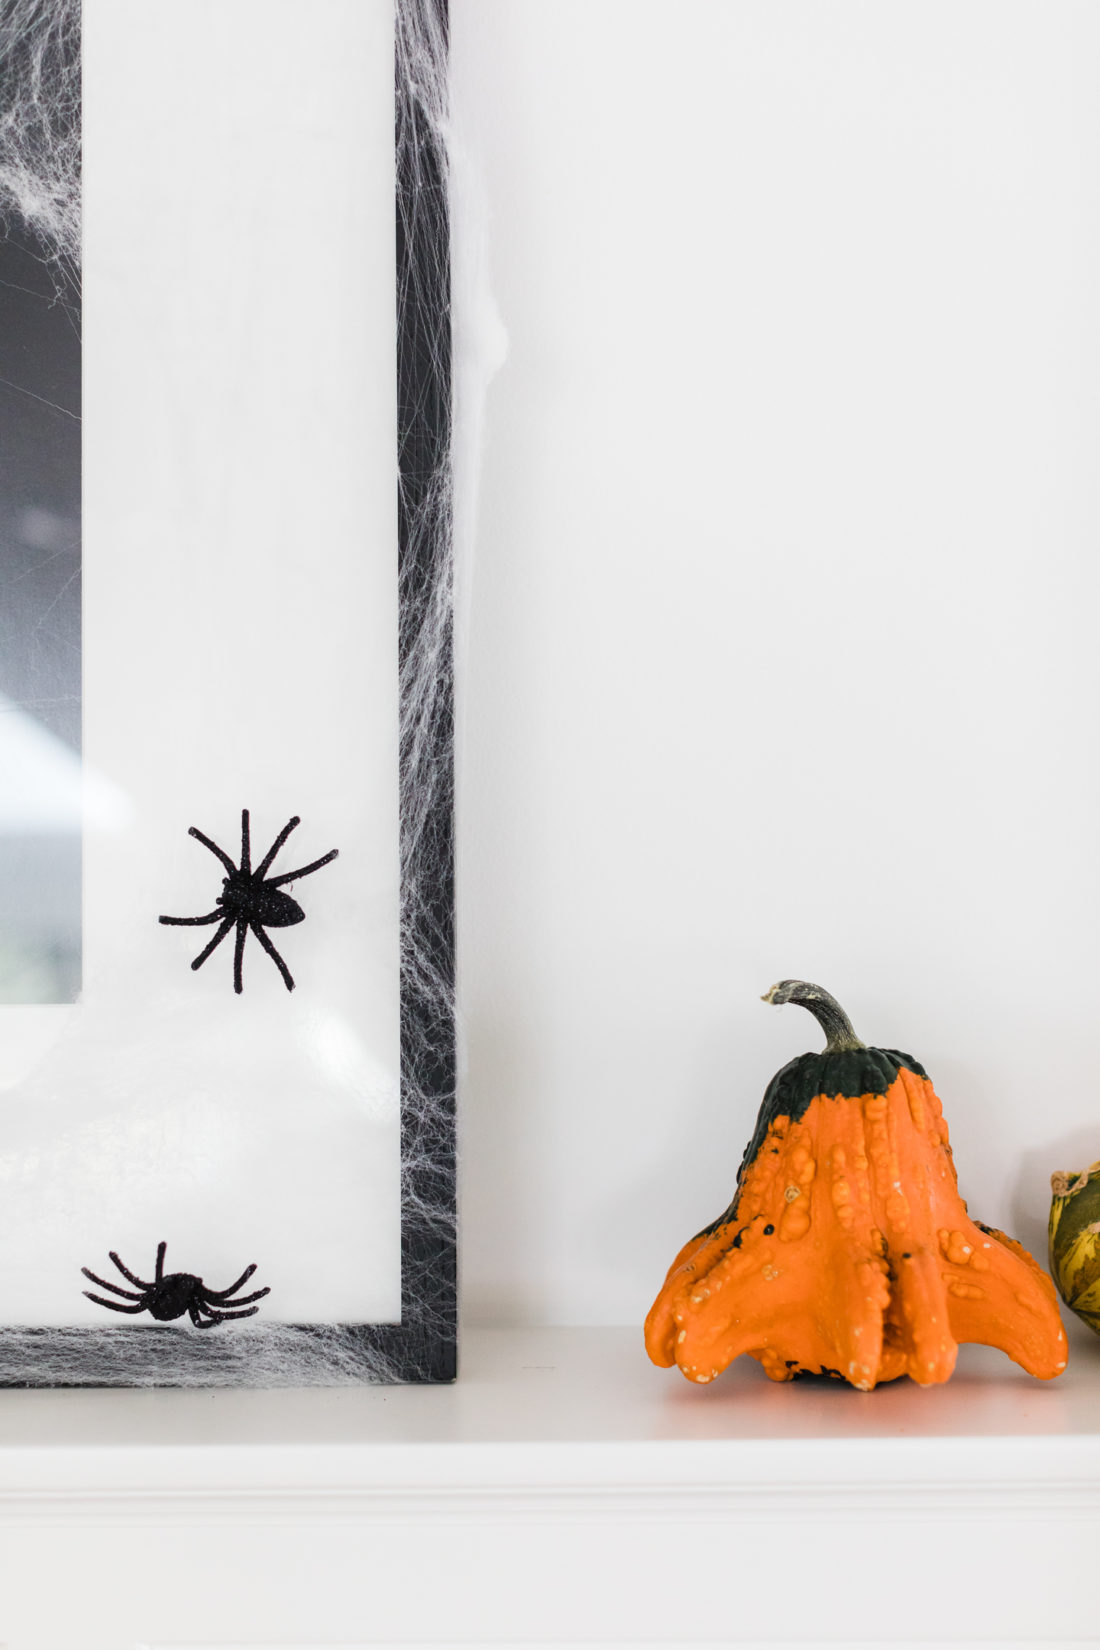 The kitchen area is decorated in a spooky bat theme for Halloween in Eva Amurri Martino's Connecticut home